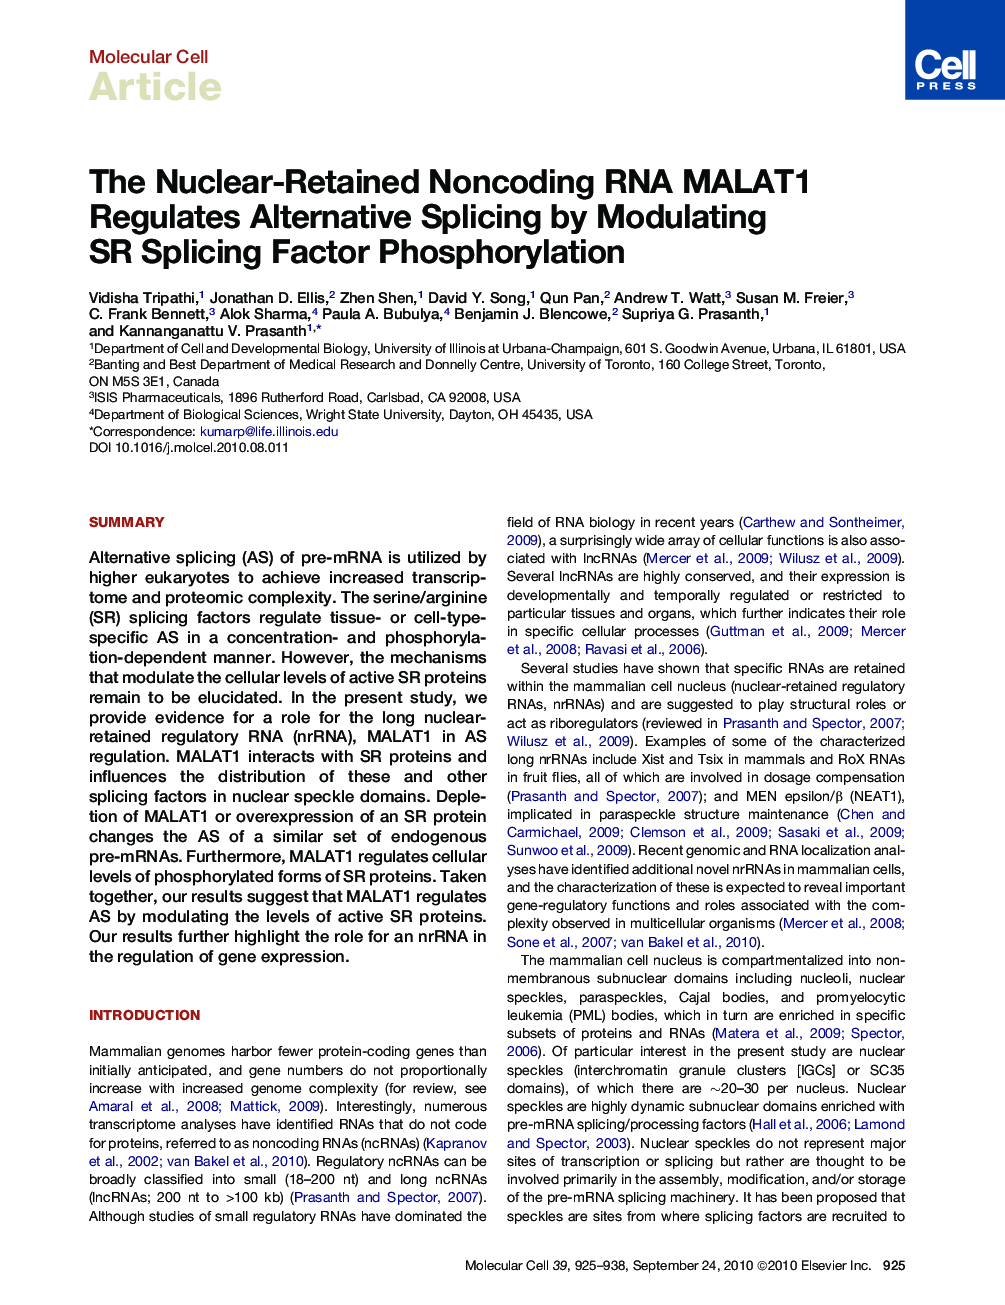 The Nuclear-Retained Noncoding RNA MALAT1 Regulates Alternative Splicing by Modulating SR Splicing Factor Phosphorylation